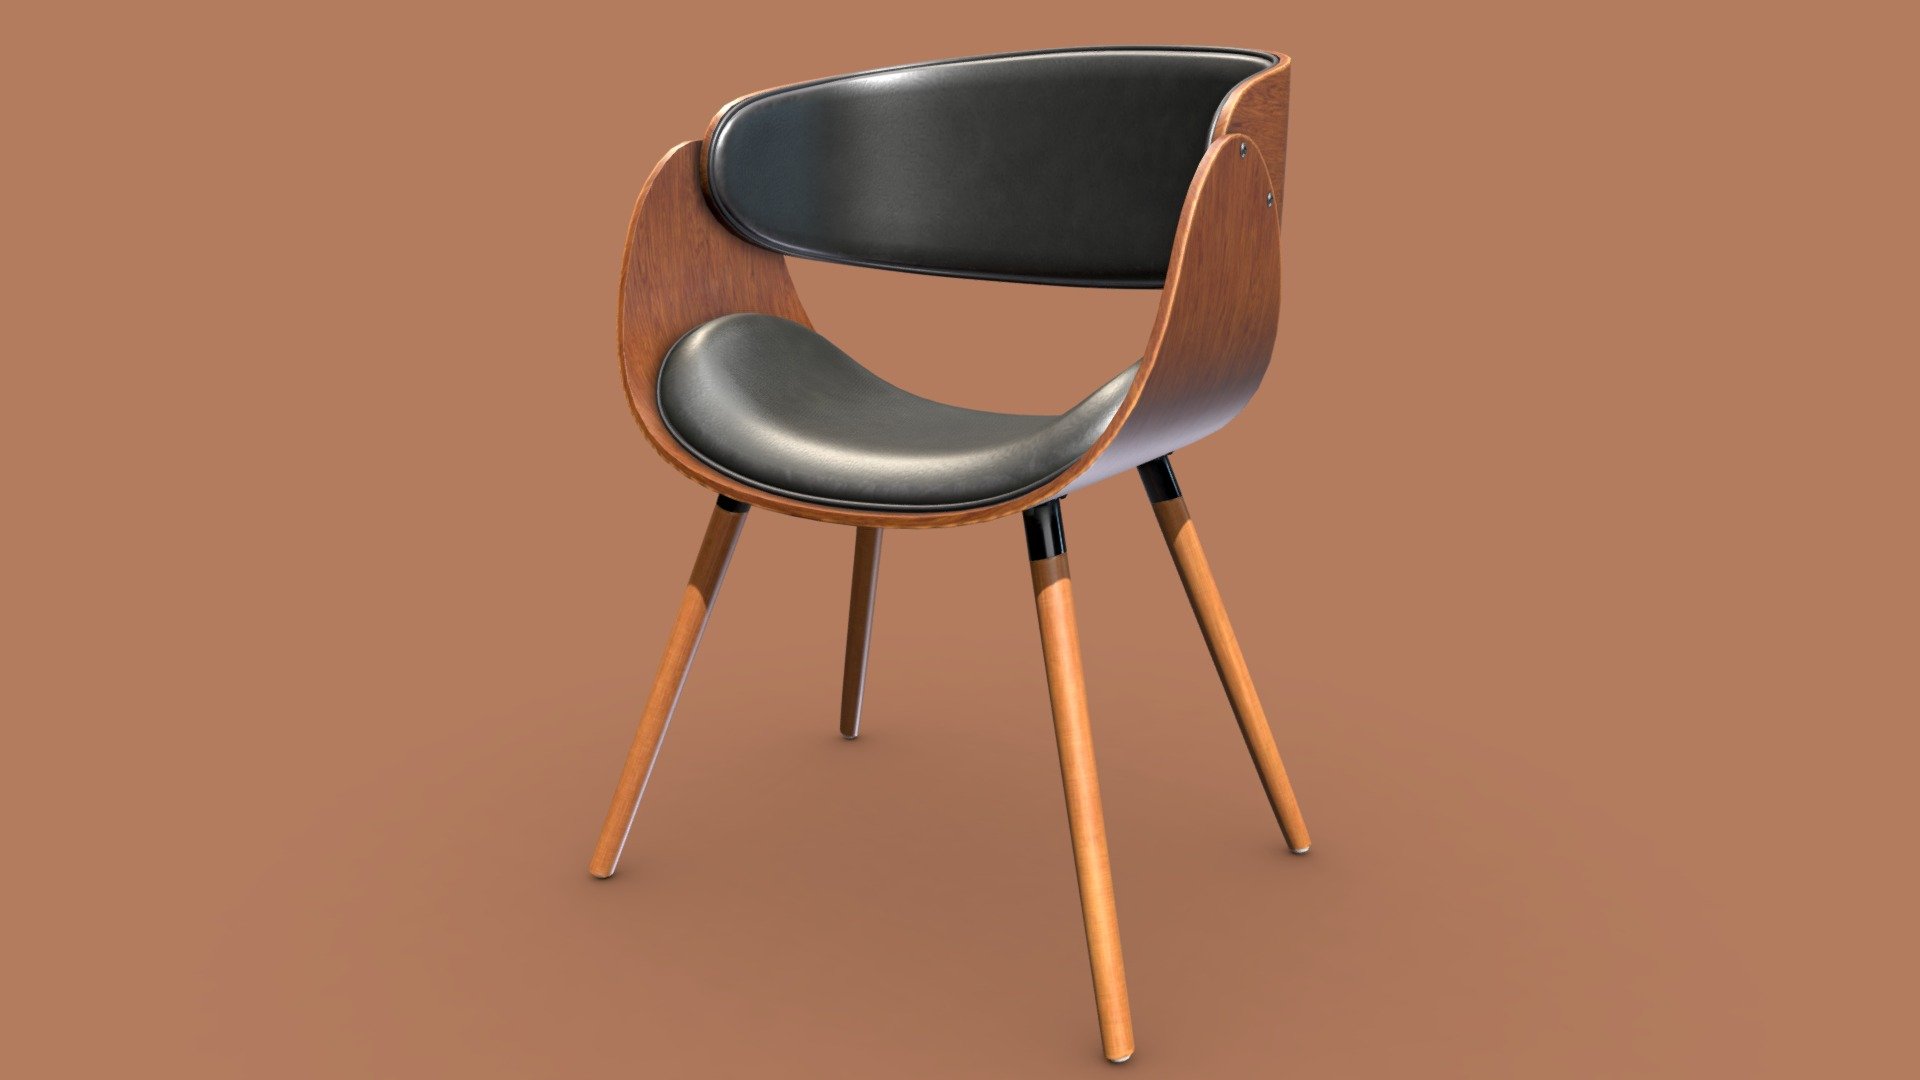 Hey People,Welcome Back!

My Store -https://sketchfab.com/leaguestudio
Check my store for more models..

Renders using Arnold : https://www.artstation.com/artwork/GamX3N

This is an Corvus Chair.I made this just for study practice purpose,i did this in 2 hrs,Model,Texture,Lighting..

Textures - 4k,Vfx asset,Game ready,Lowpoly,photo realistic

Download&hellip; - Corvus-Mid-century-Modern-Accent-Chair - Buy Royalty Free 3D model by League Studio (@leaguestudio) 3d model